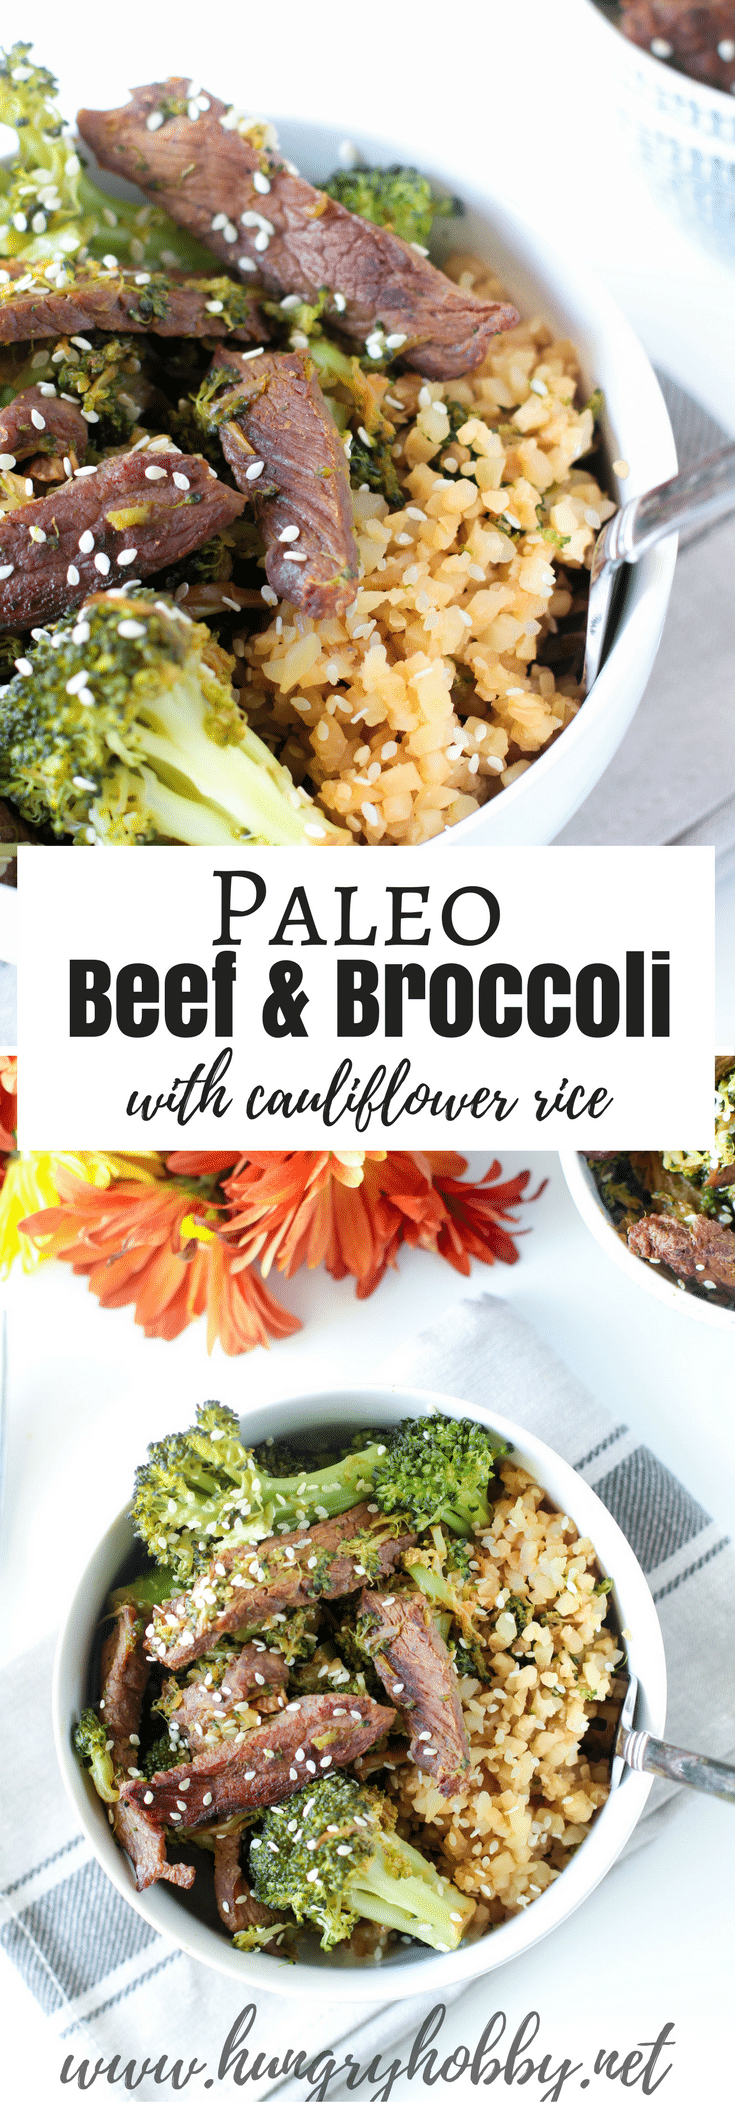 Healthy Paleo Beef and Broccoli - Gluten & Soy Free